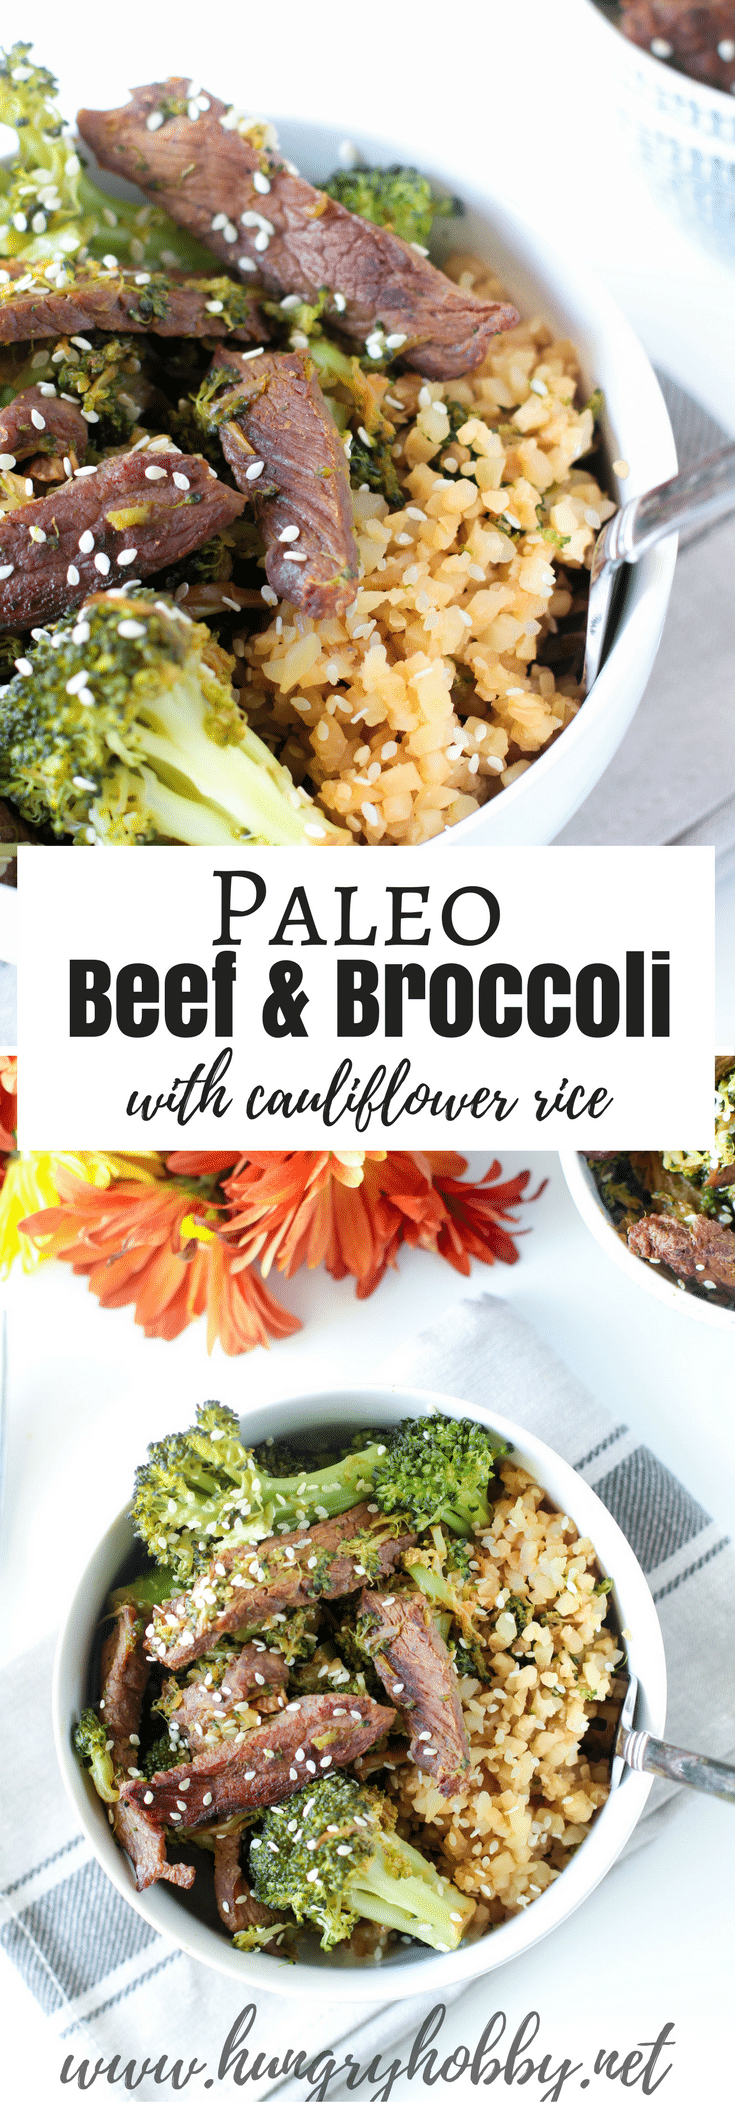 Healthy Paleo Beef and Broccoli - Gluten & Soy Free